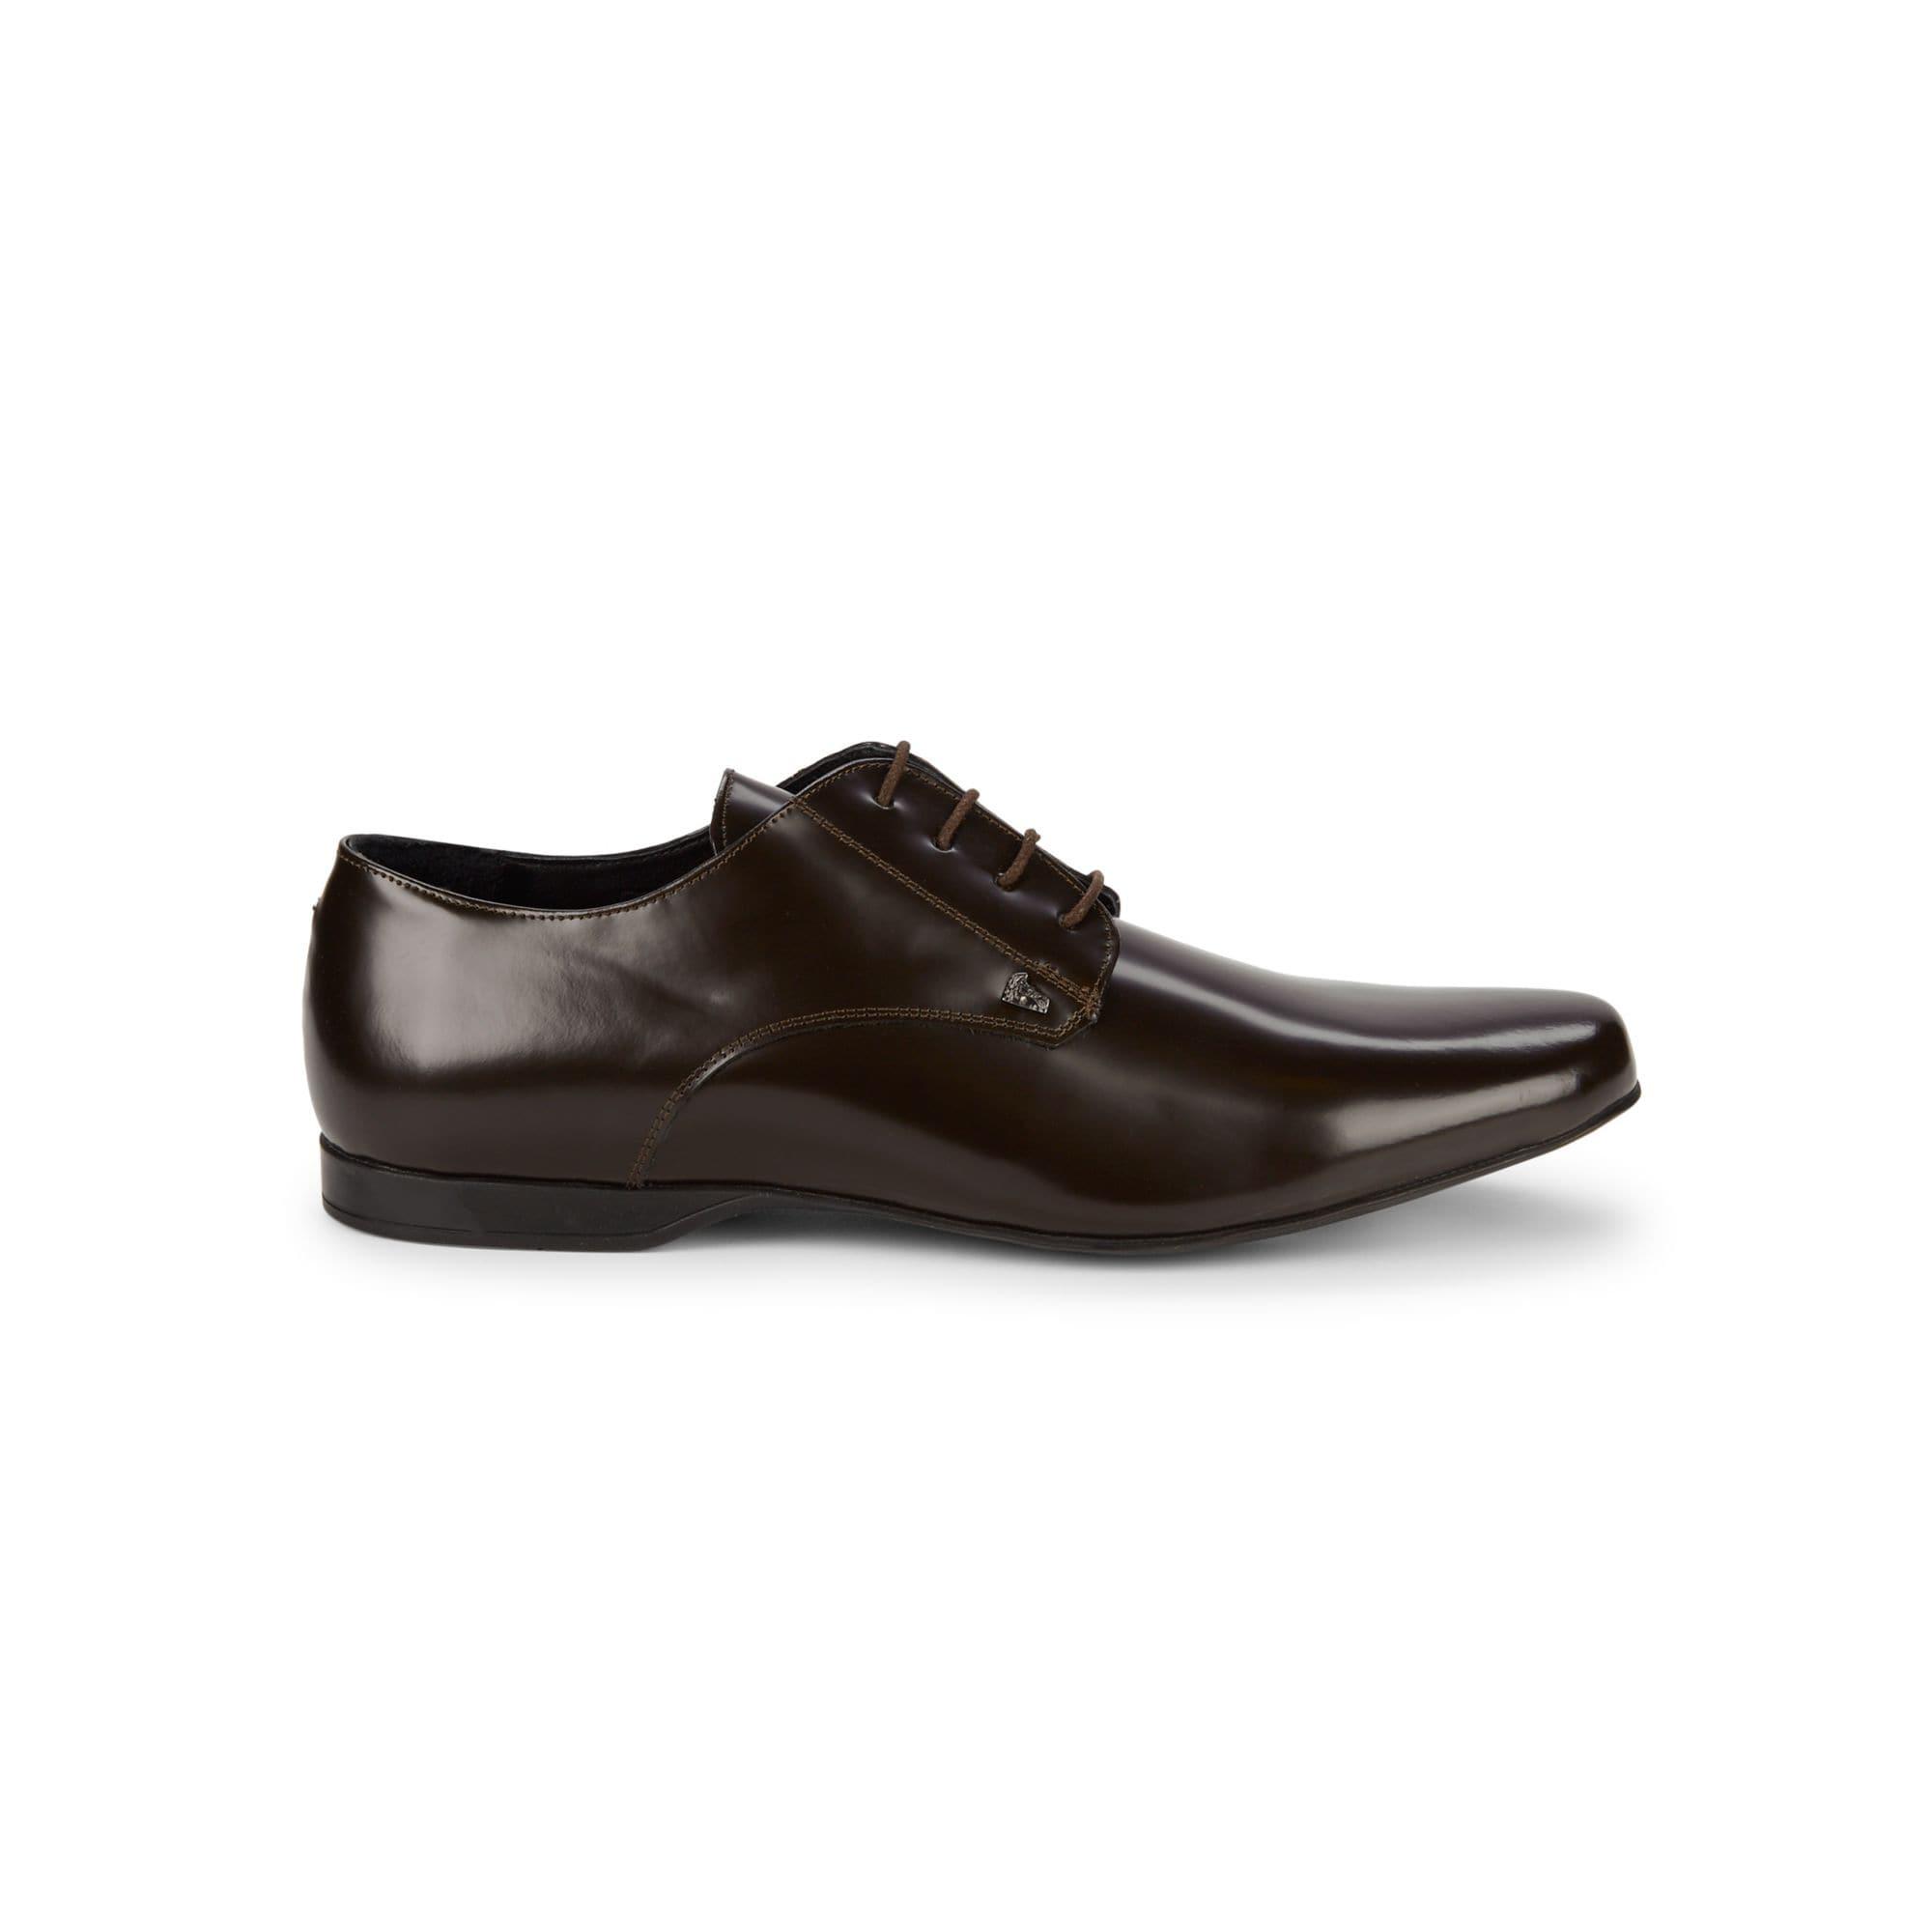 Versace Leather Polished Derby Shoes in 